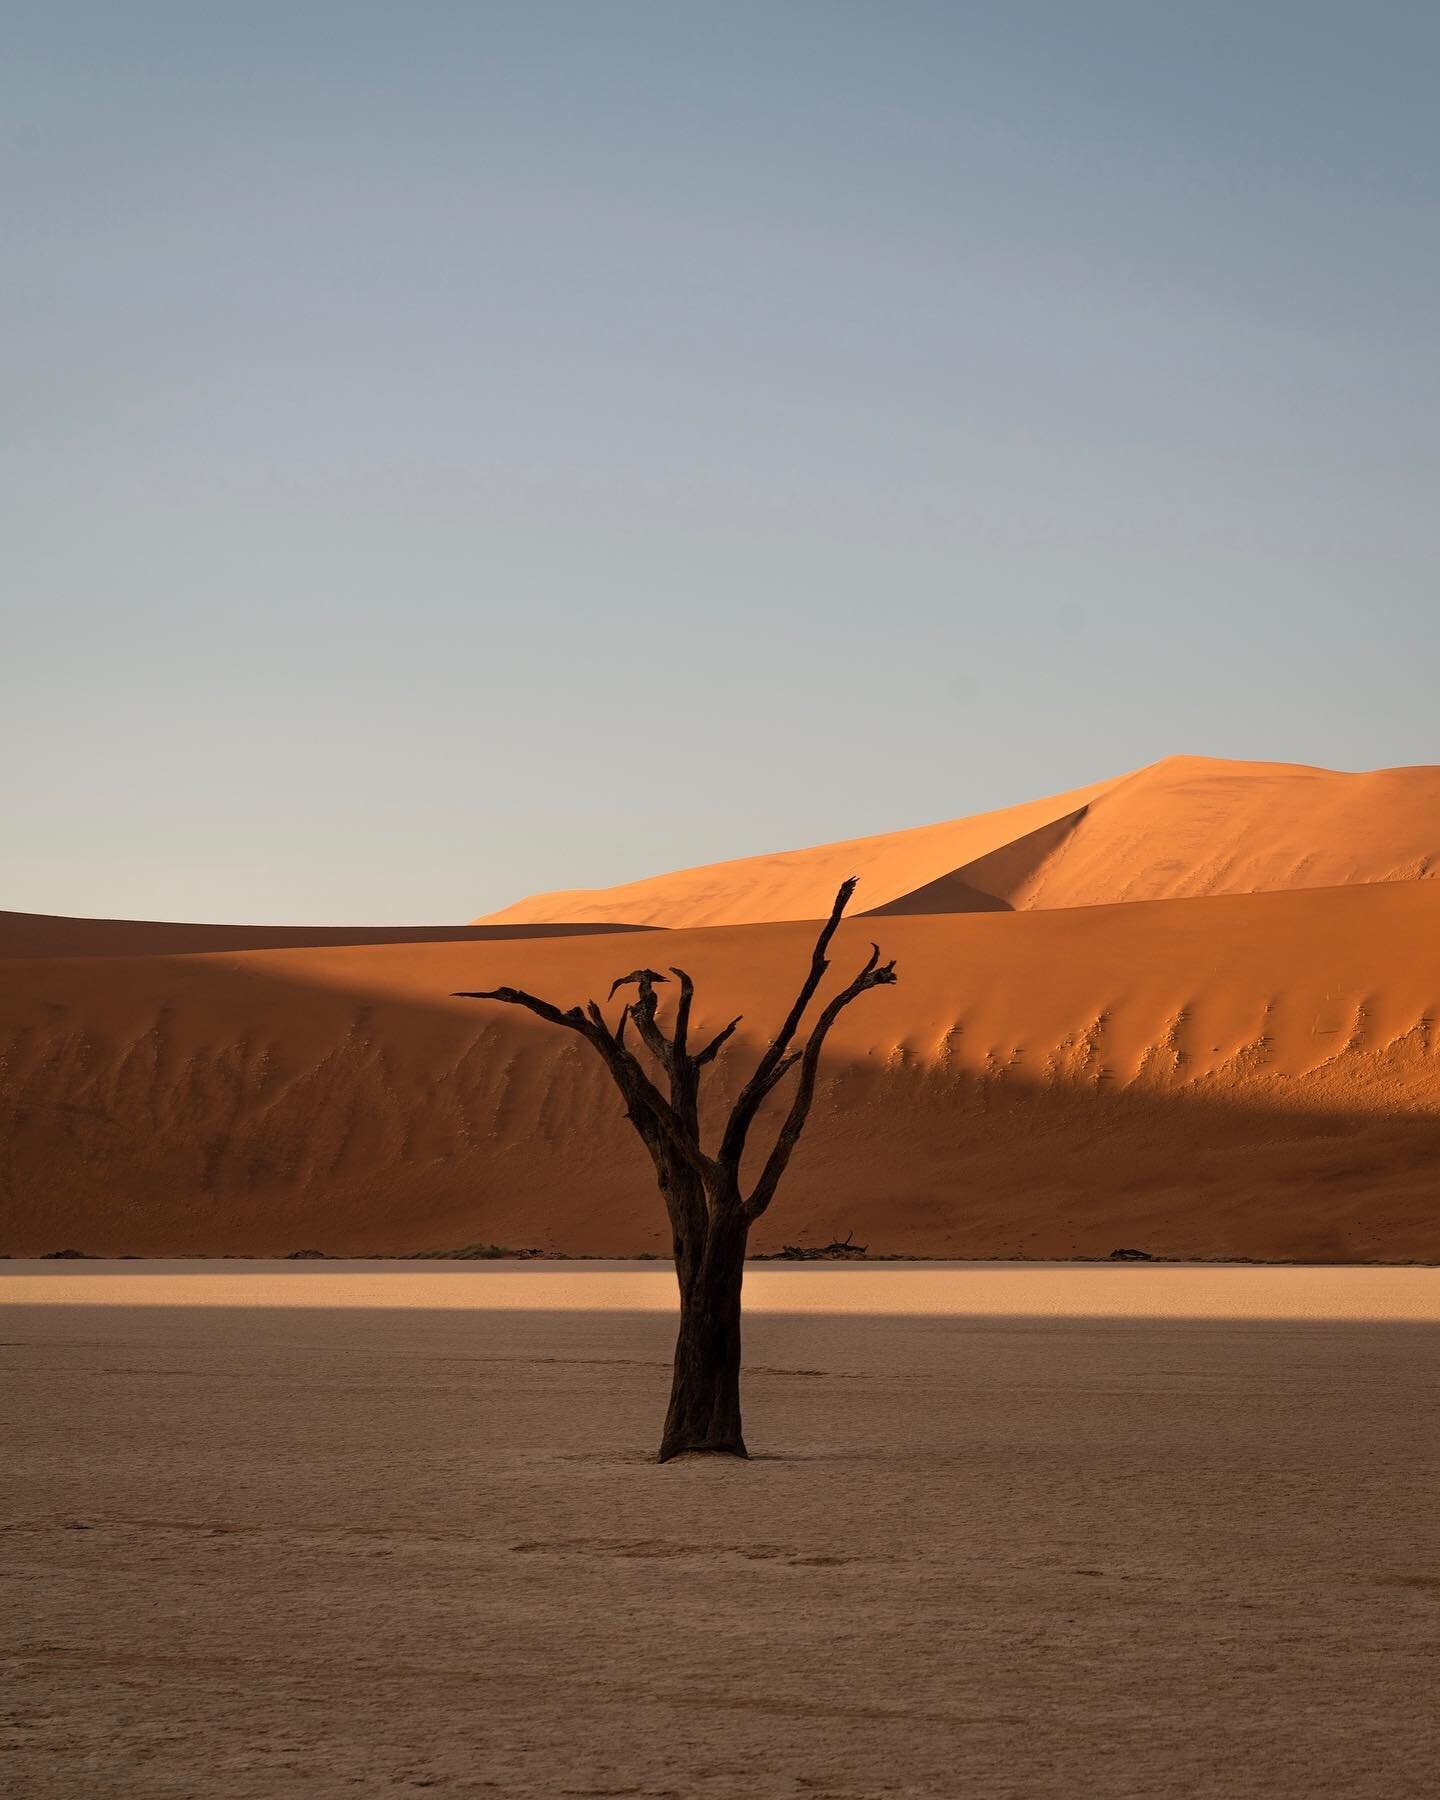 ⁣Reminiscing about all the memorable moments lived during my four weeks roaming Namibia. The morning I took this image I remember arriving at the gate of the Sossusvlei National Park long before the opening time just to be sure to have some time to e